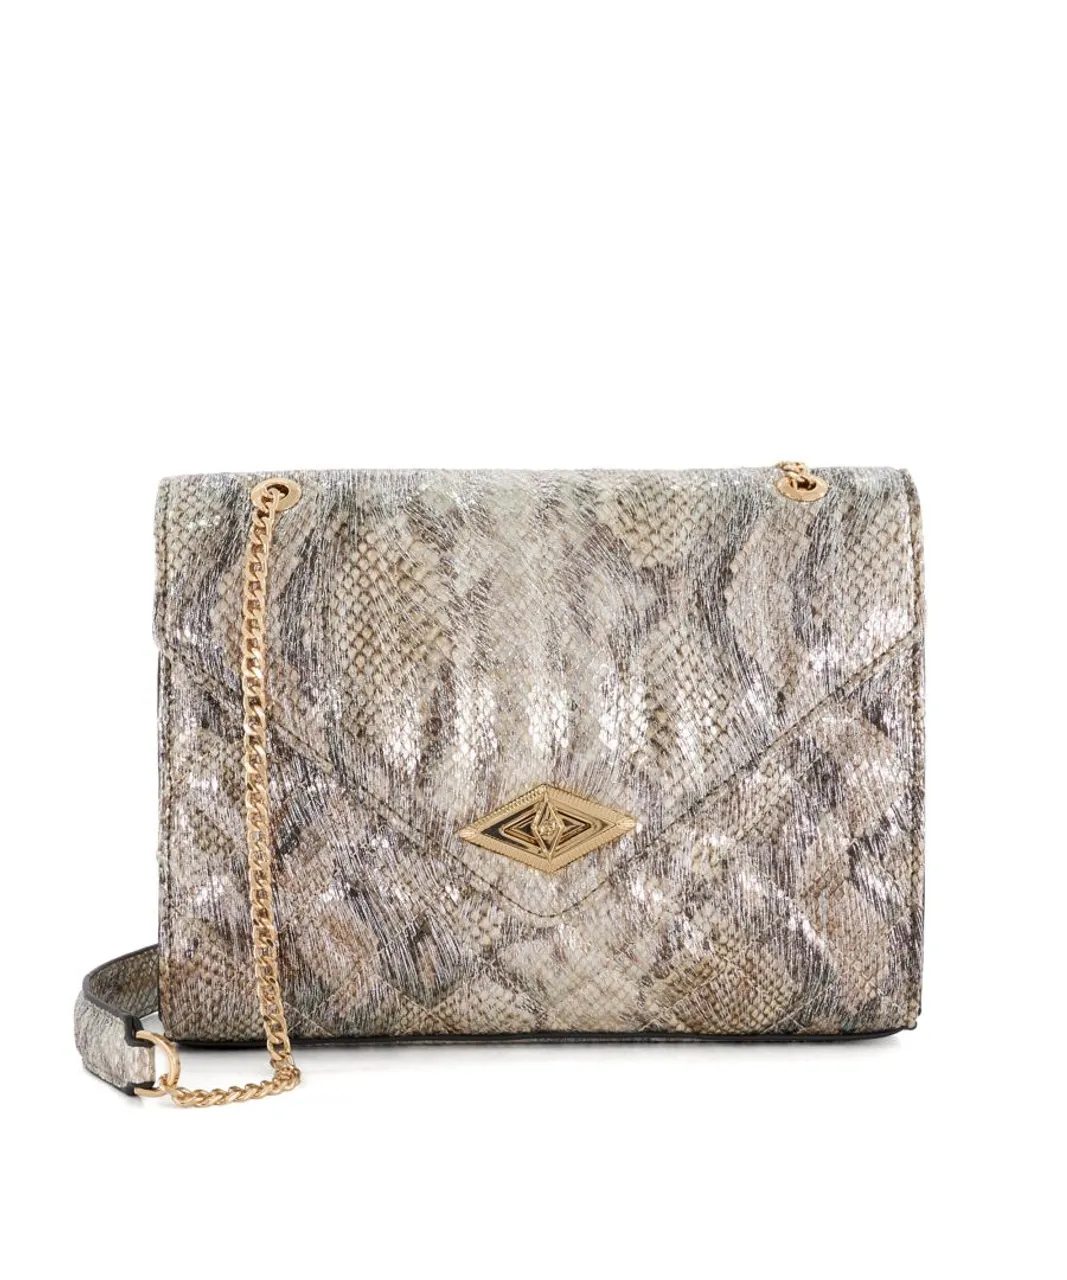 Dune London Womens ACCESSORIES DELLSIE - - Quilted Chain-Handle Clutch Bag - Silver - One Size